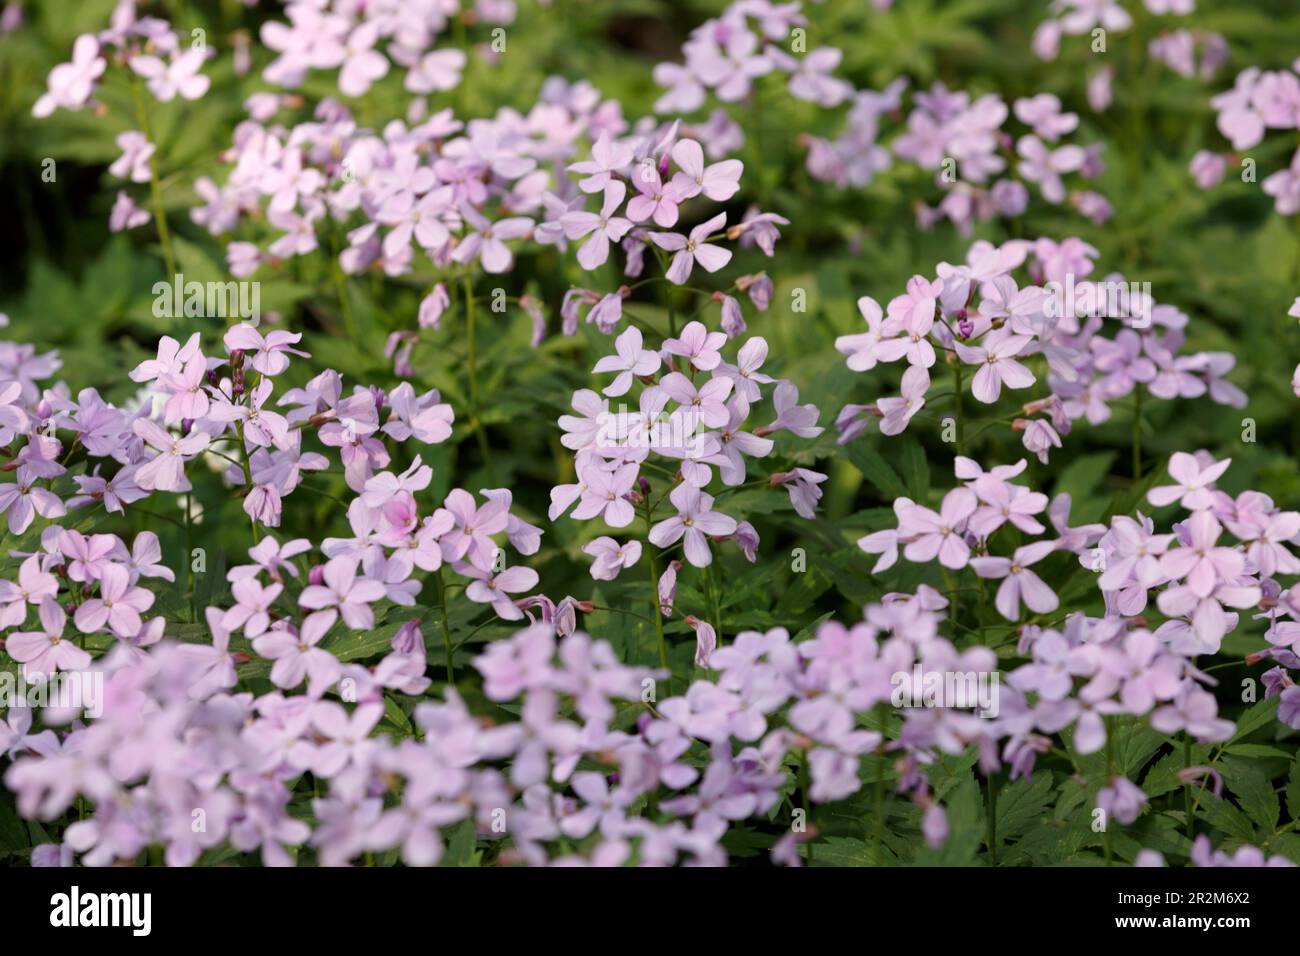 Pink Arabis caucasica. Arabis alpina, mountain rockcress or alpine rock cress. White arabis caucasica flowers growing in the forest. Floral background Stock Photo